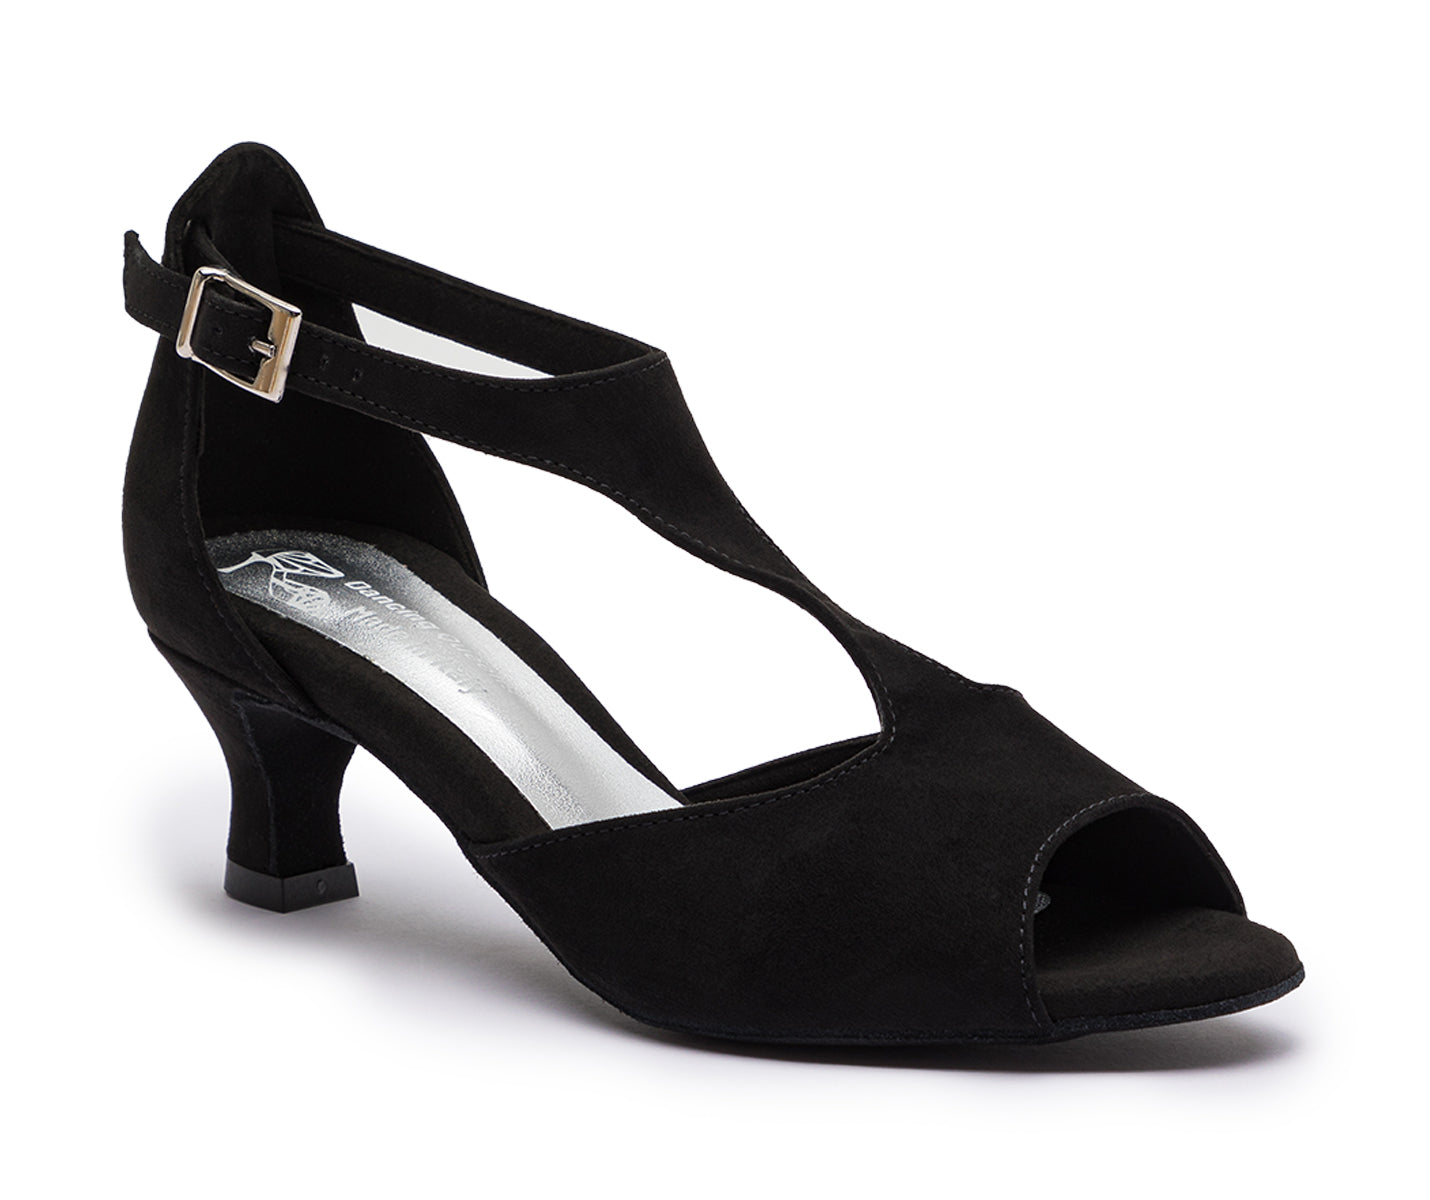 DQ1001 dance shoes in black with suede sole